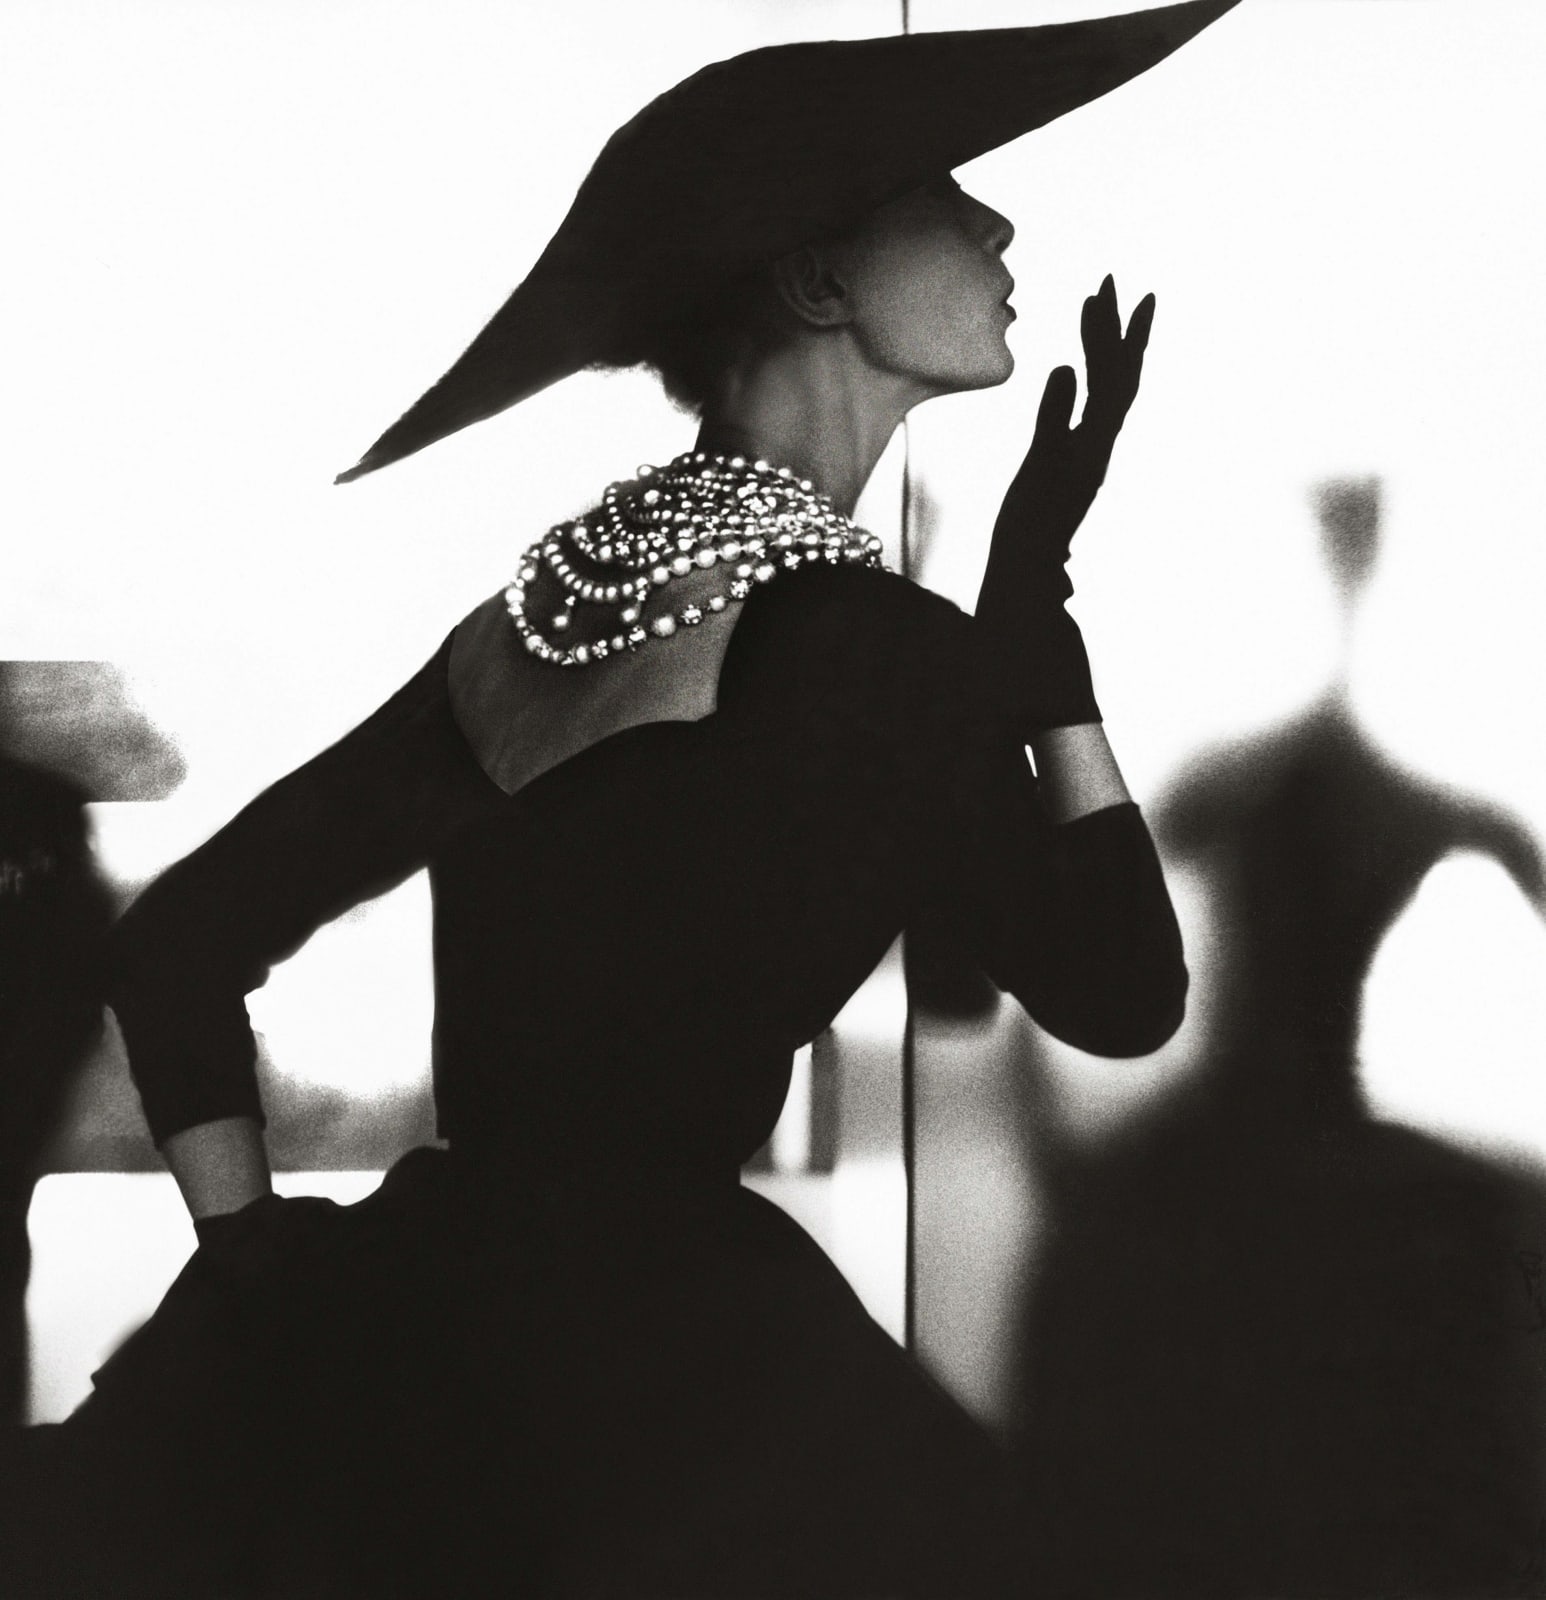 Lillian Bassman photograph of Barbara Mullen in black dress and necklace blowing a kiss